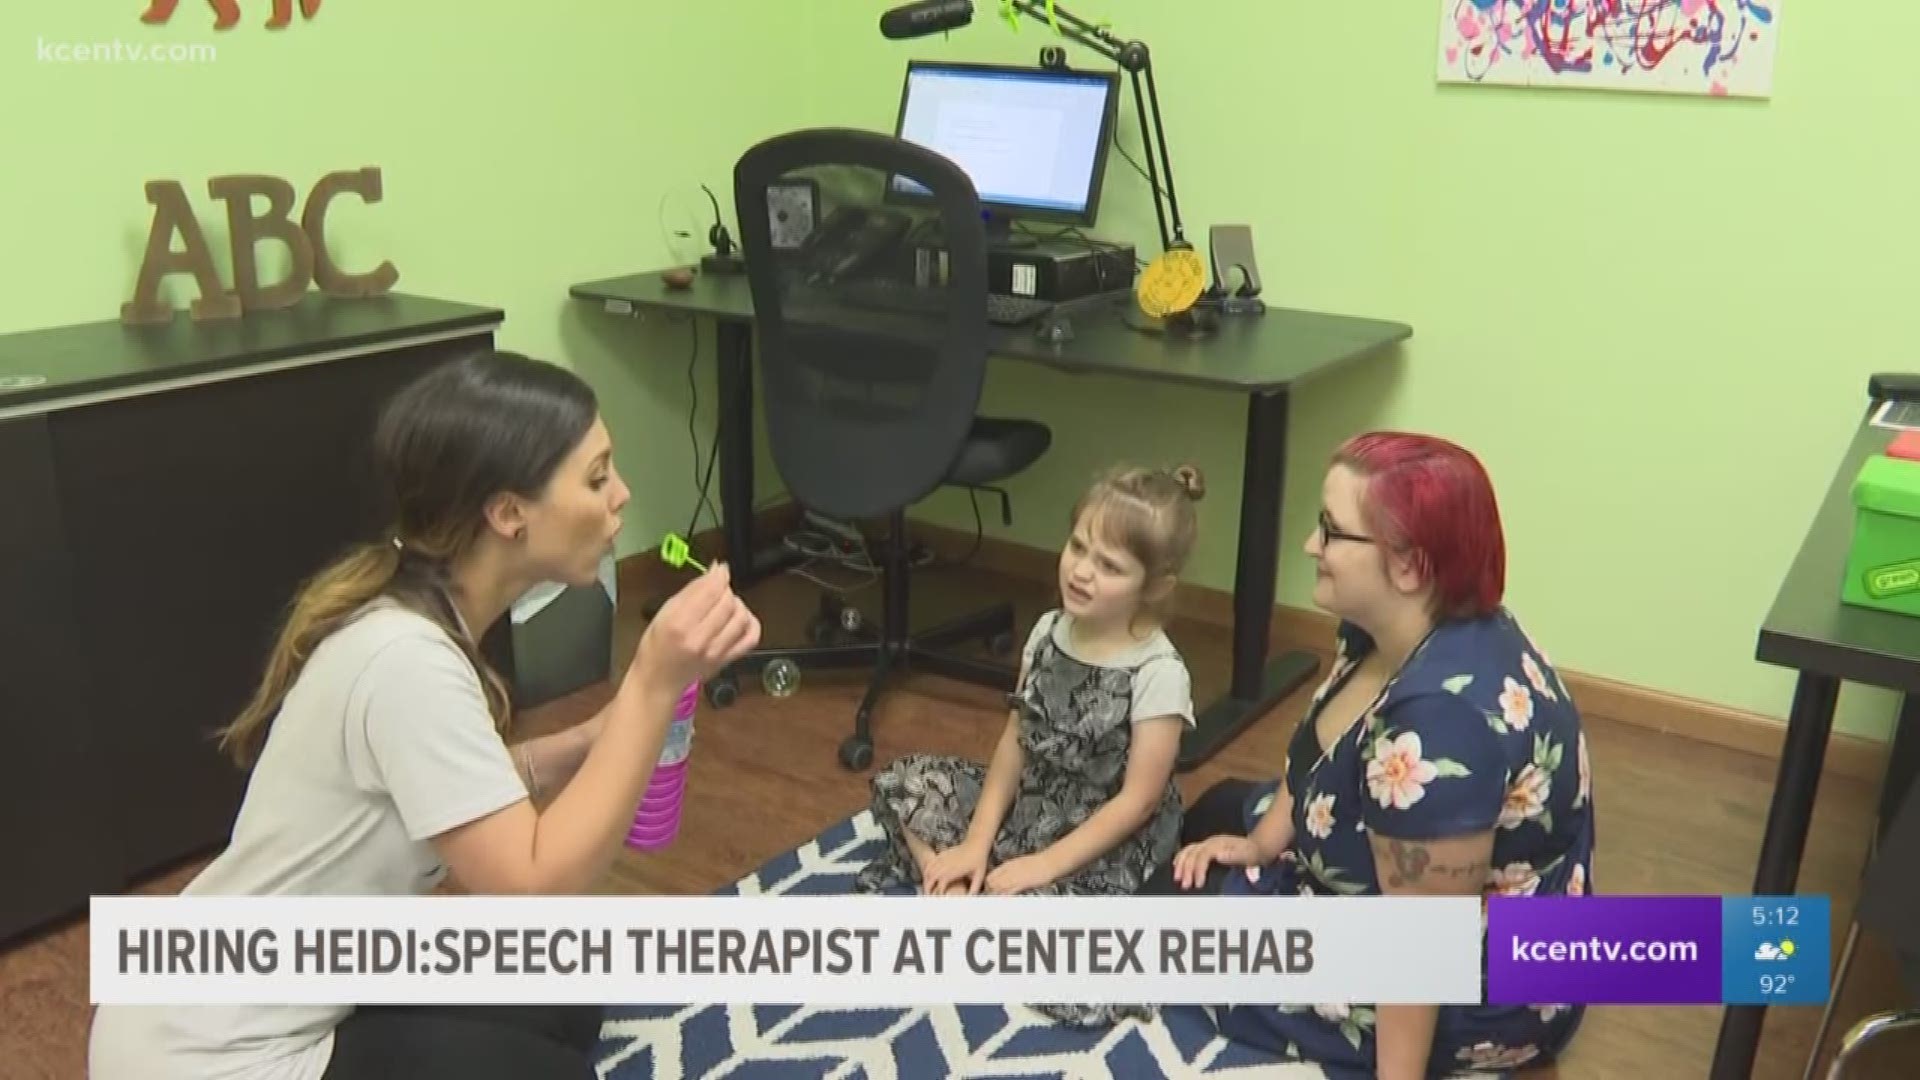 In this edition of Hiring Heidi, Texas Today anchor Heidi Alagha worked with kids again, this time as a speech therapist at Centex Rehab.